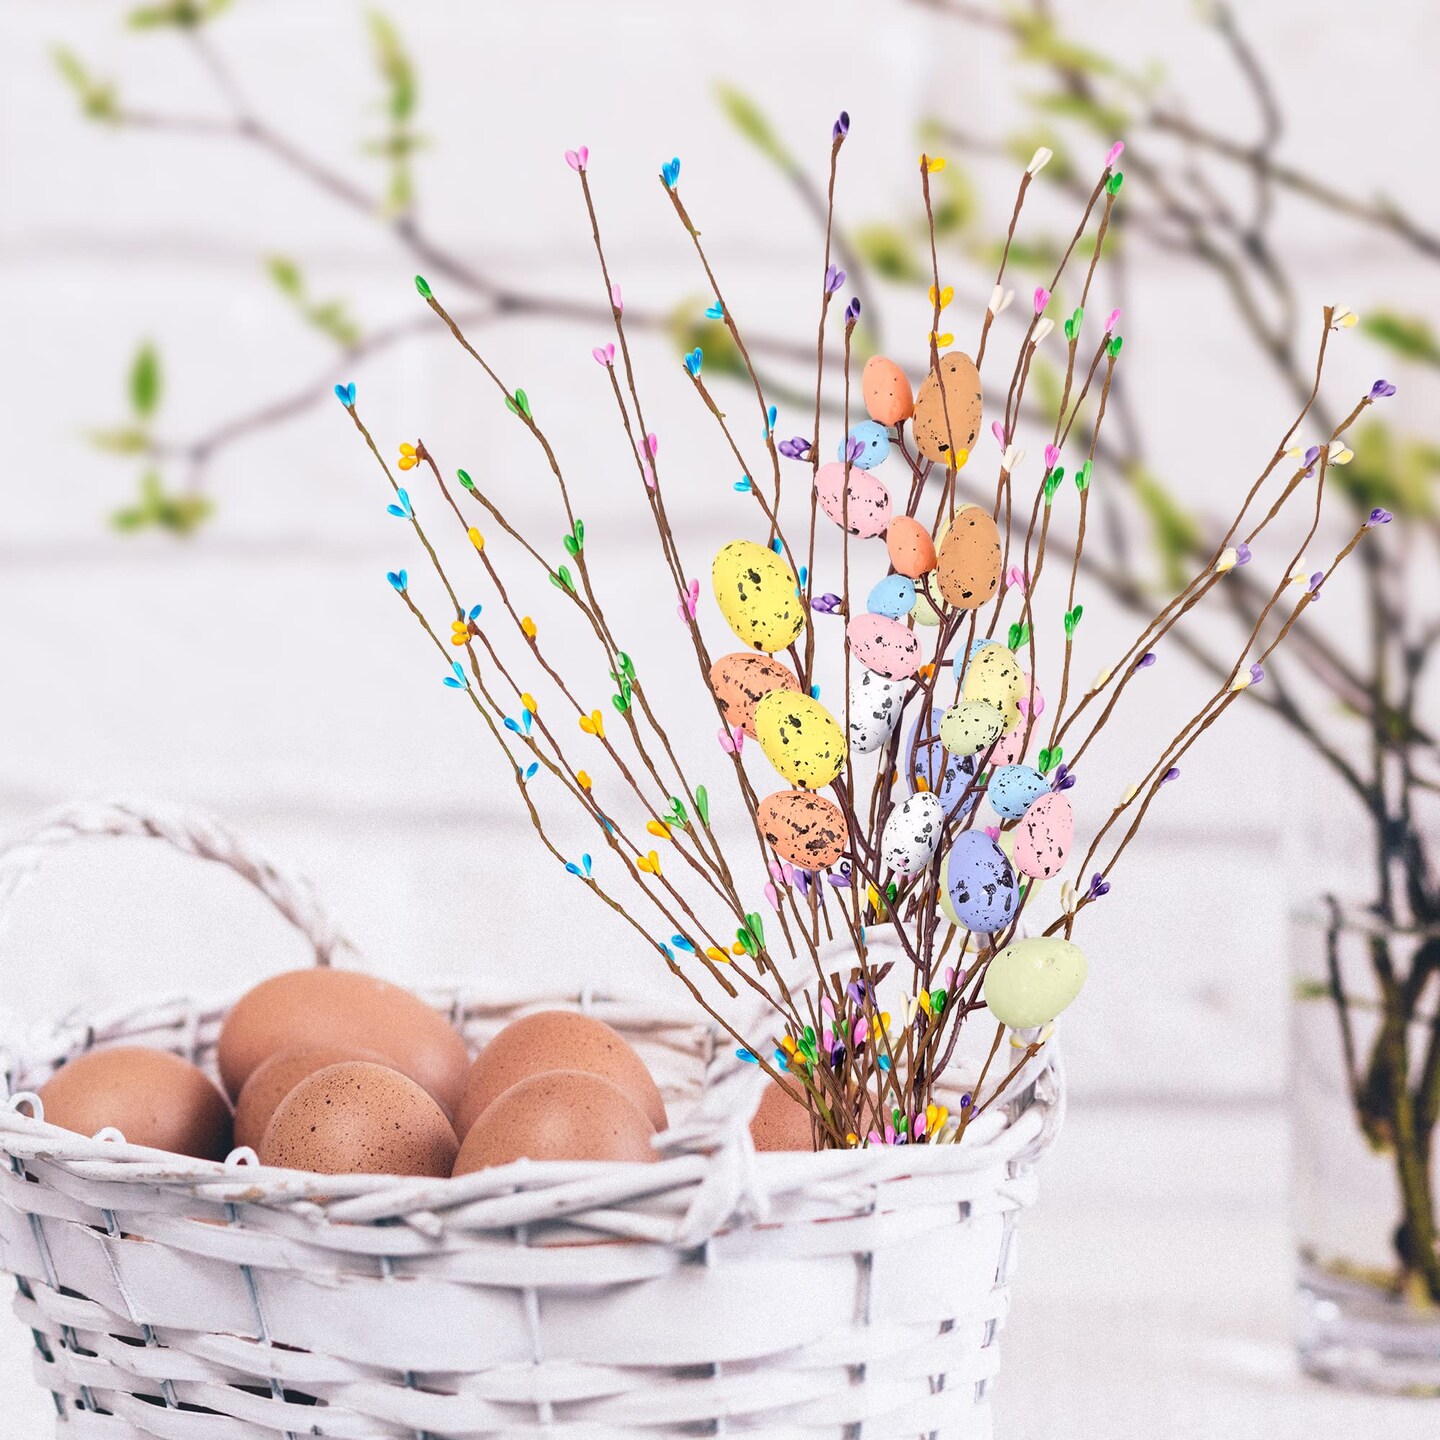 Shitailu Artificial Easter Spray Vine with Pastel Easter Eggs and Berries- Decorative Spring Floral Stems-Easter Egg Twig Branches for Floral Arrangement-Centerpiece Wreath Decoration (26 Pcs)